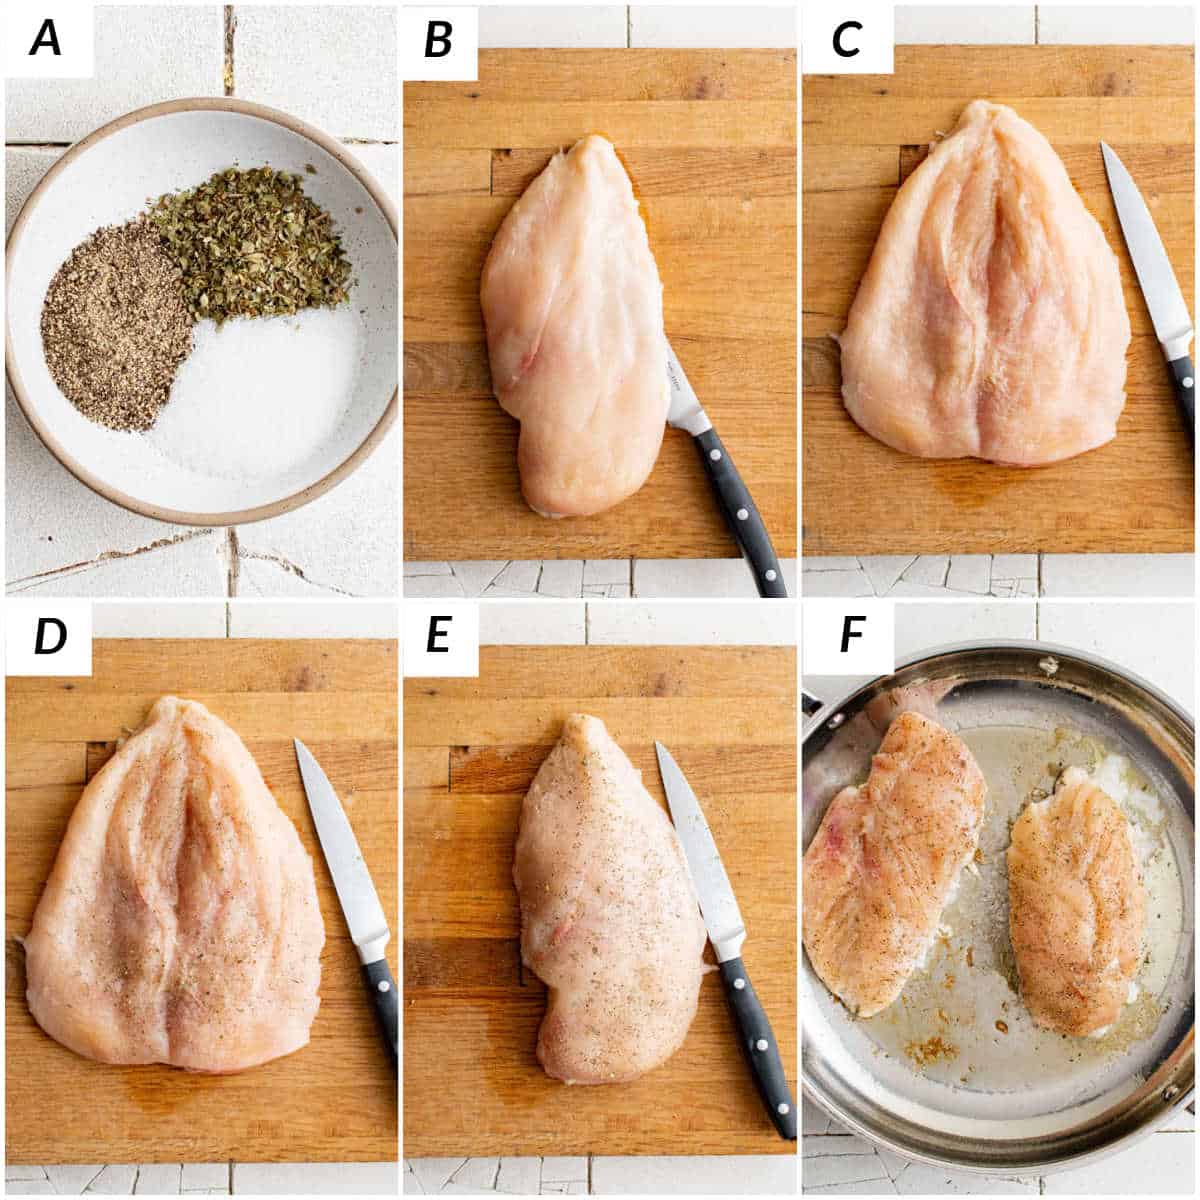 image collage showing the steps for making asparagus stuffed chicken breast